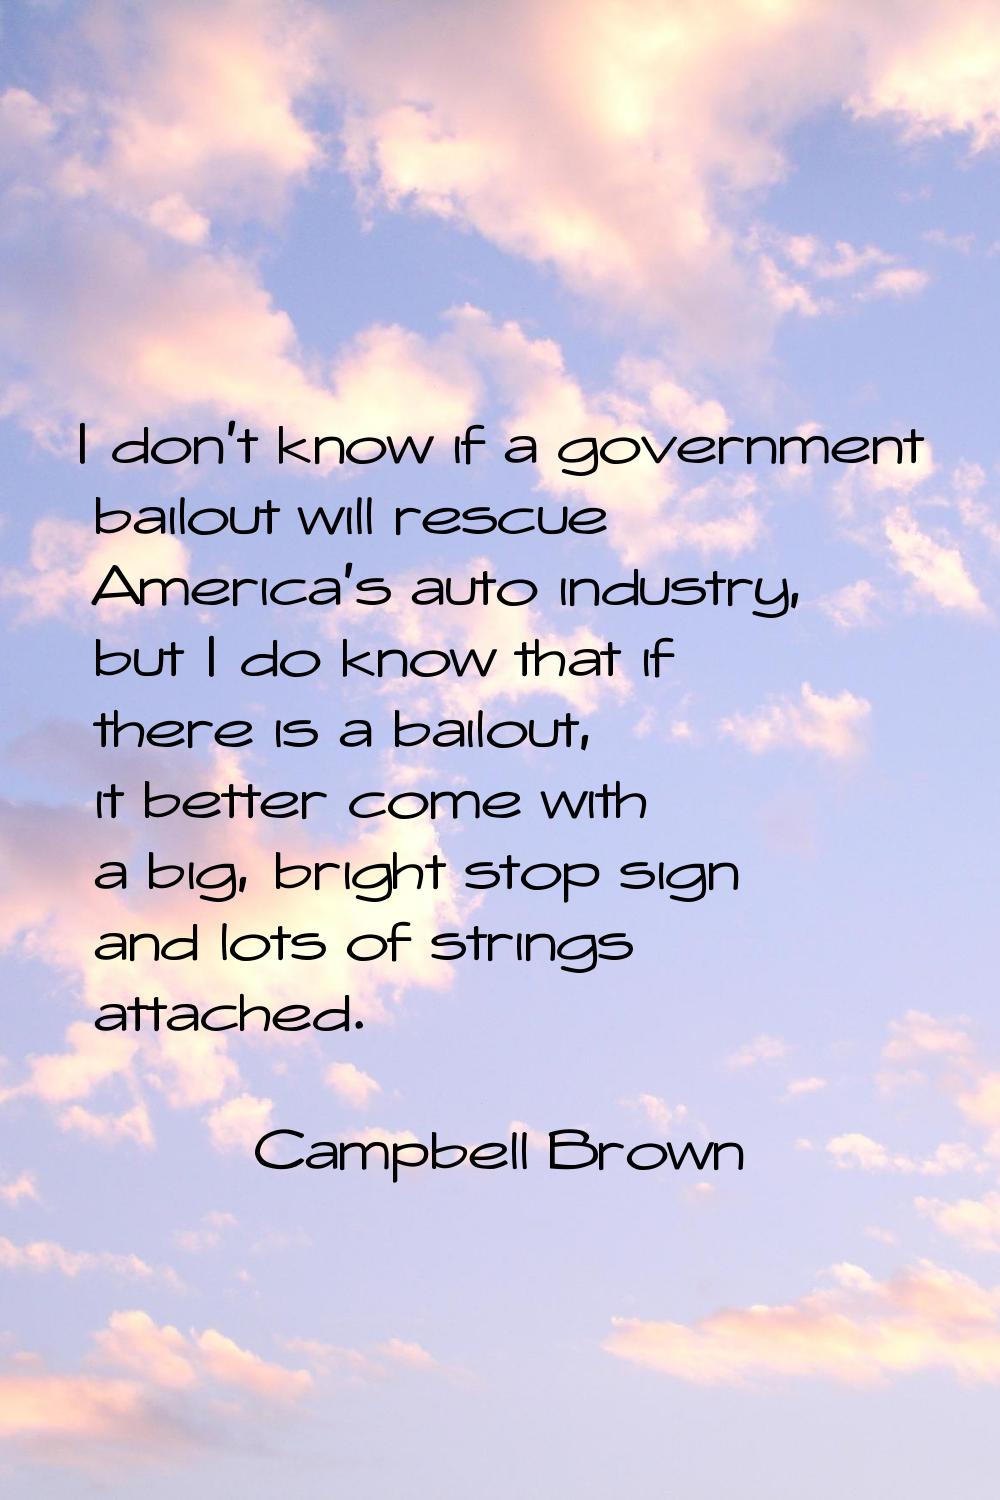 I don't know if a government bailout will rescue America's auto industry, but I do know that if the